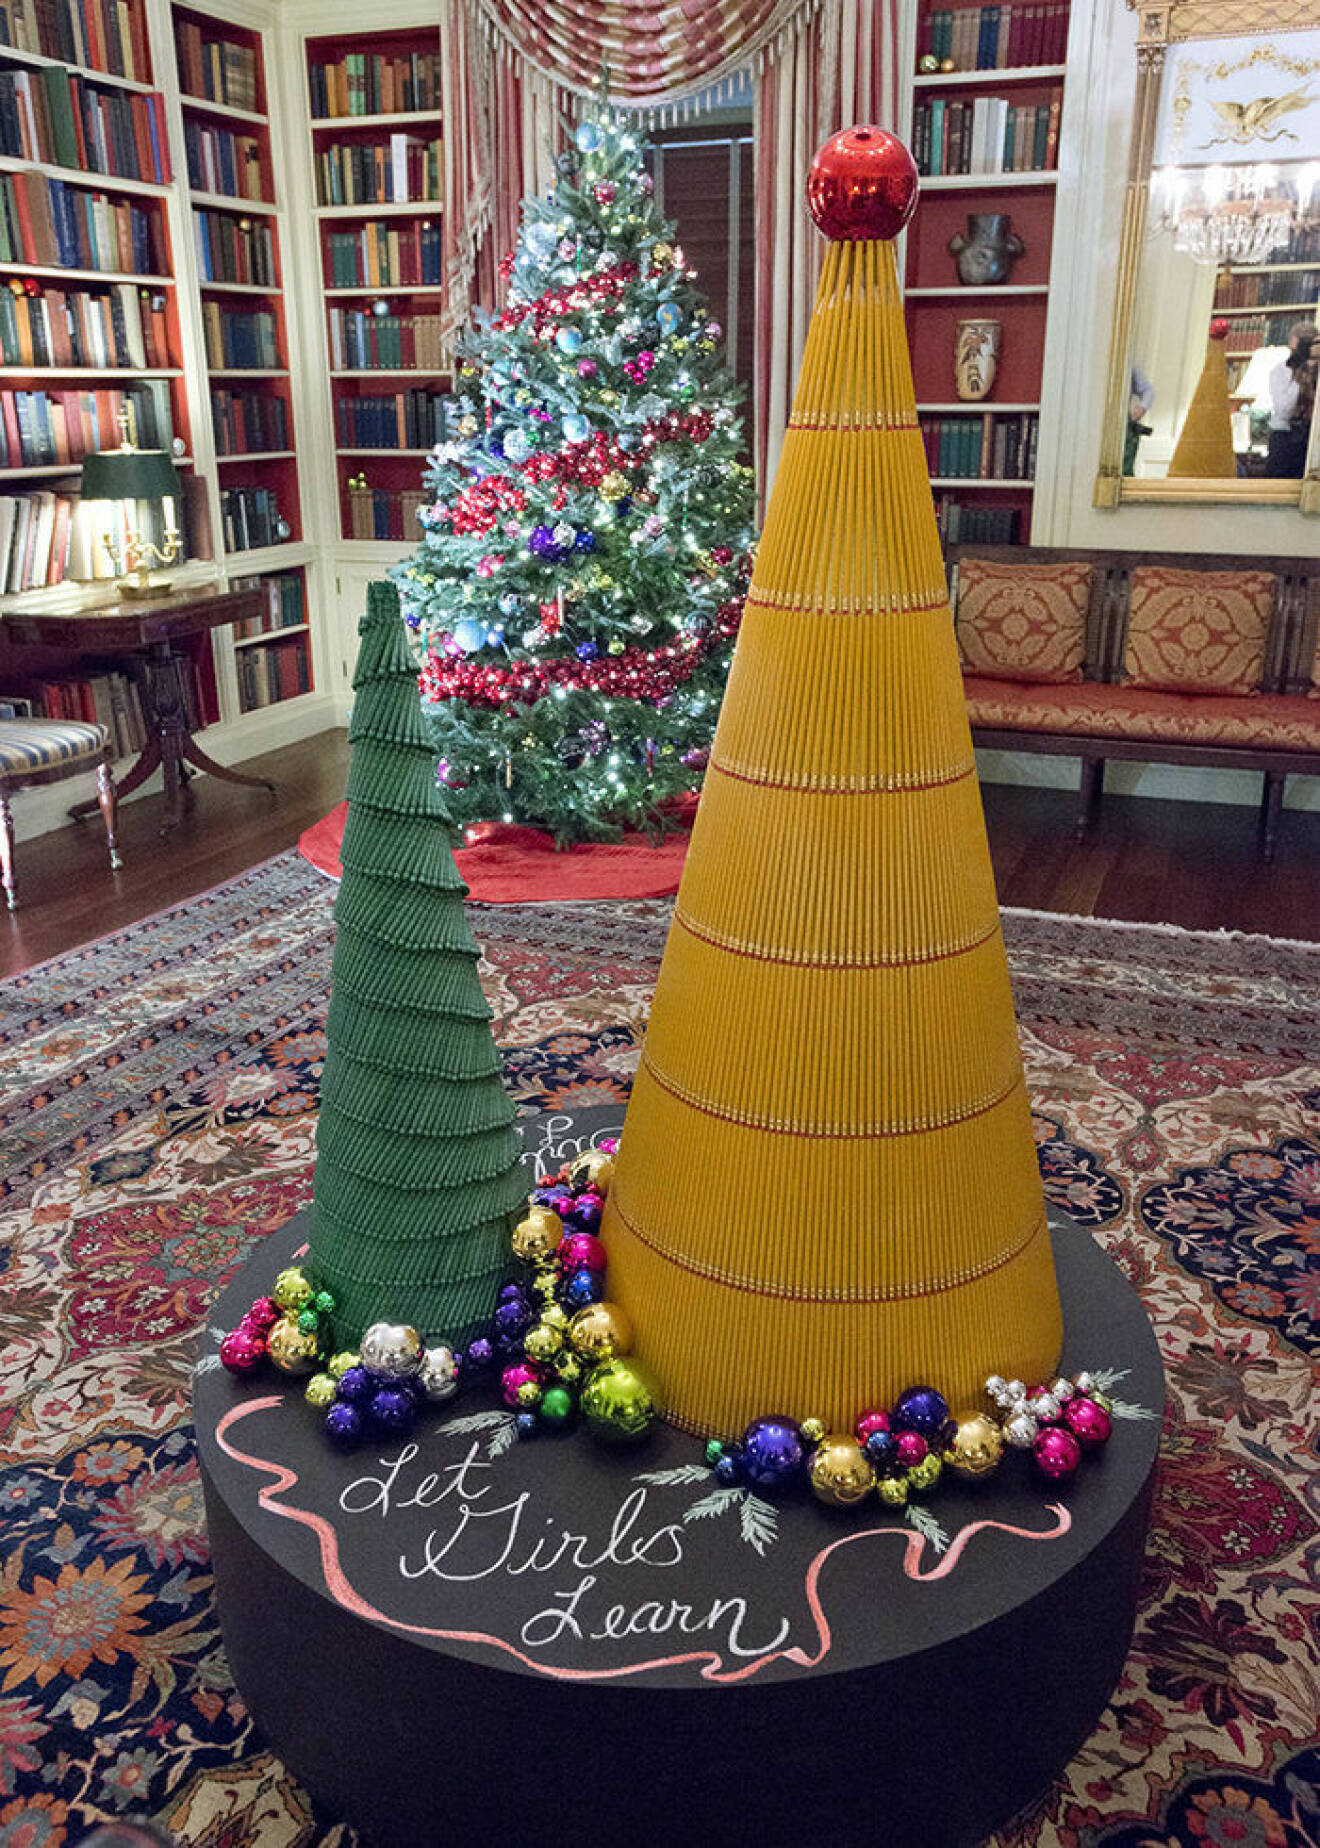 The 2016 White House Christmas decorations are previewed for the press at the White House in Washington, DC on Tuesday, November 29, 2016. The Gift of Education is brought to life in The Library, highlighting the more than 2,700 books housed there. Rulers will rim the base of the holiday trees while crayons and pencils create additional standalone trees. The colorful ornaments on display will spell out the word ?girls? in 12 different languages, paying homage to the First Lady?s Let Girls Learn initiative. The first lady's office released the following statement to describe those decorations, "This year?s holiday theme, 'The Gift of the Holidays,' reflects on not only the joy of giving and receiving, but also the true gifts of life, such as service, friends and family, education, and good health, as we celebrate the holiday season." Credit: Ron Sachs / CNP - NO WIRE SERVICE - Photo: Ron Sachs/Consolidated/dpa (c) DPA / IBL BildbyrÂ